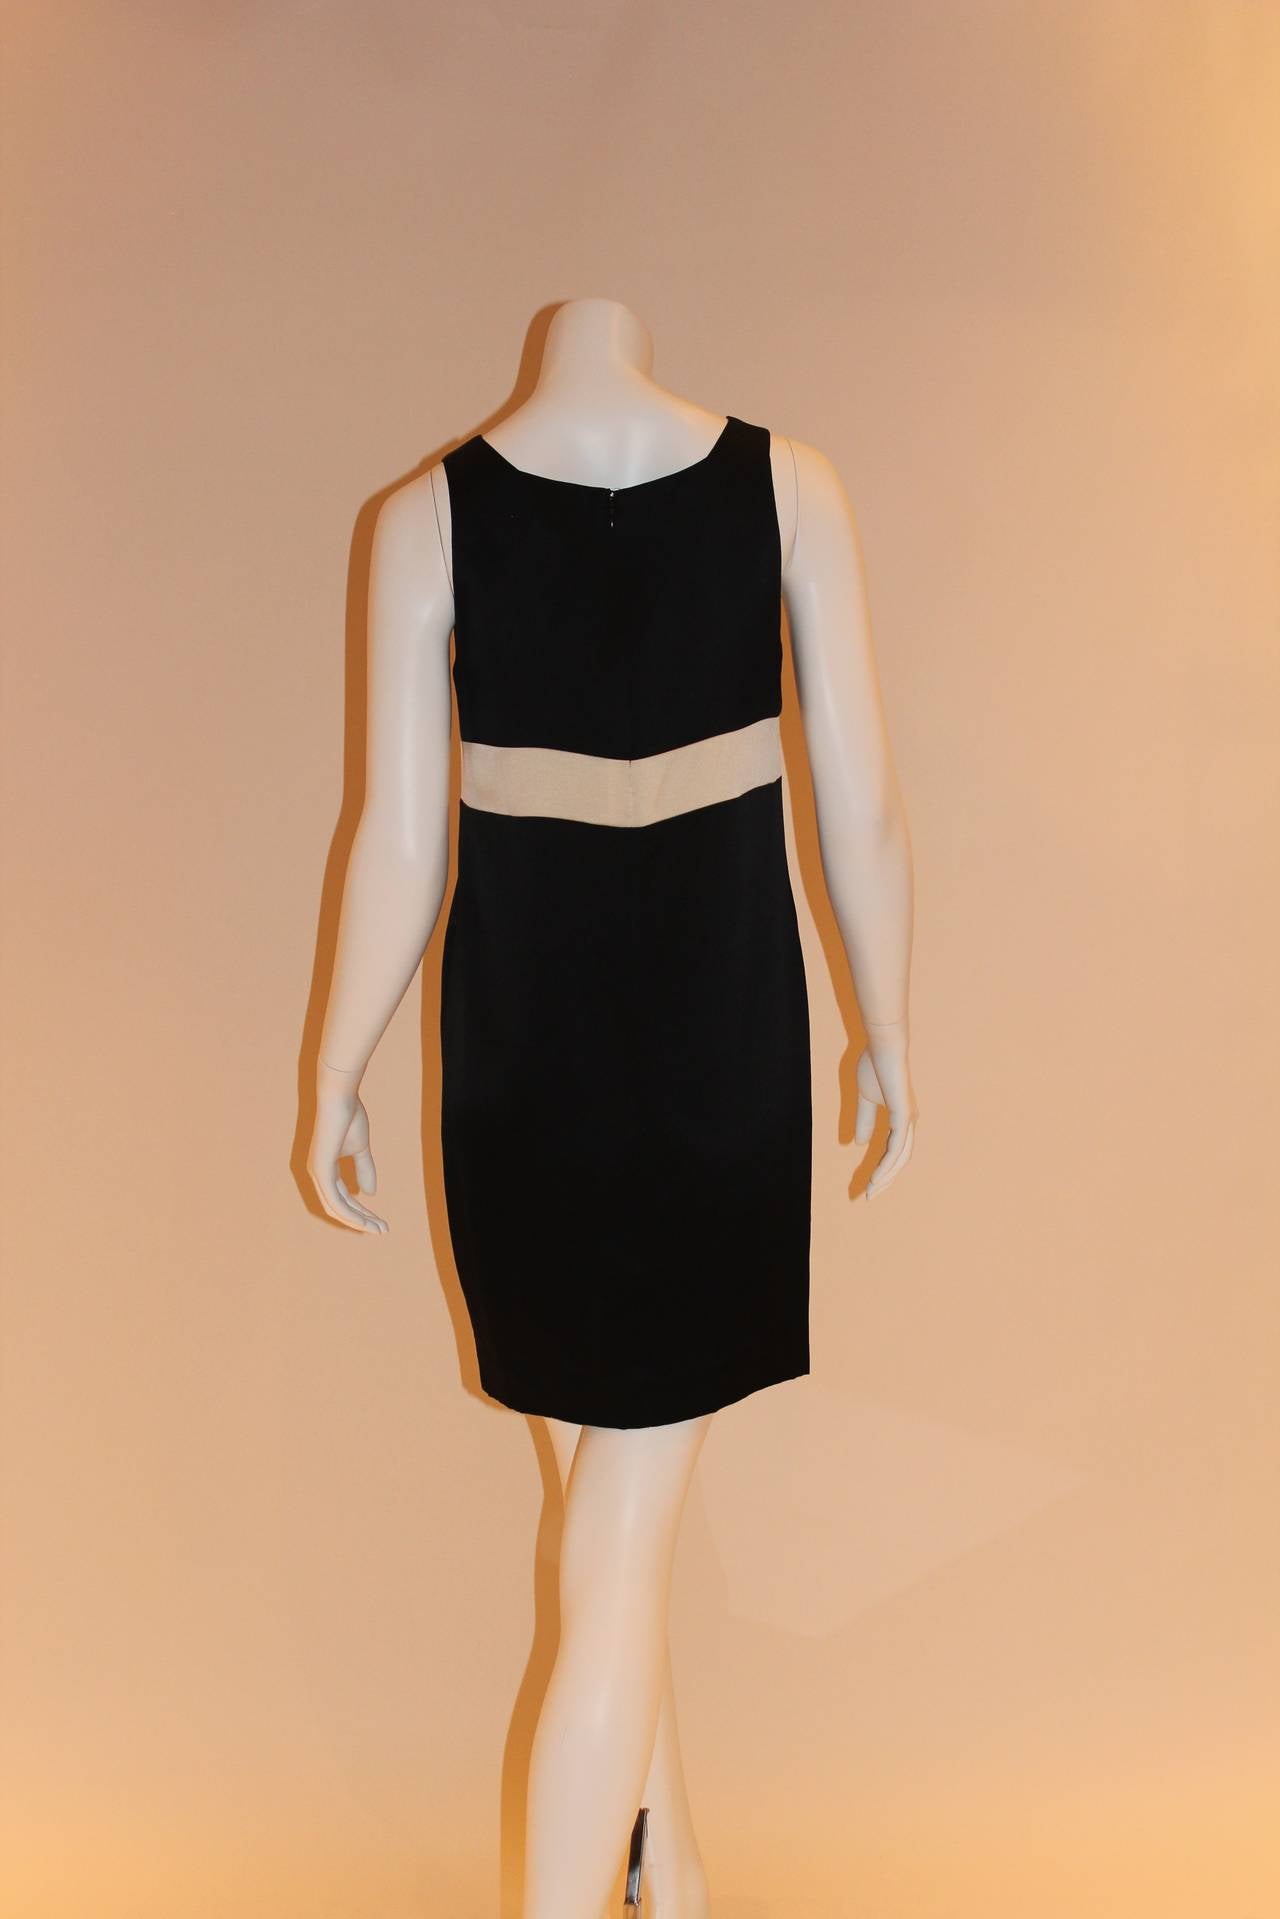 Women's 1998 Chanel Black and White Dress